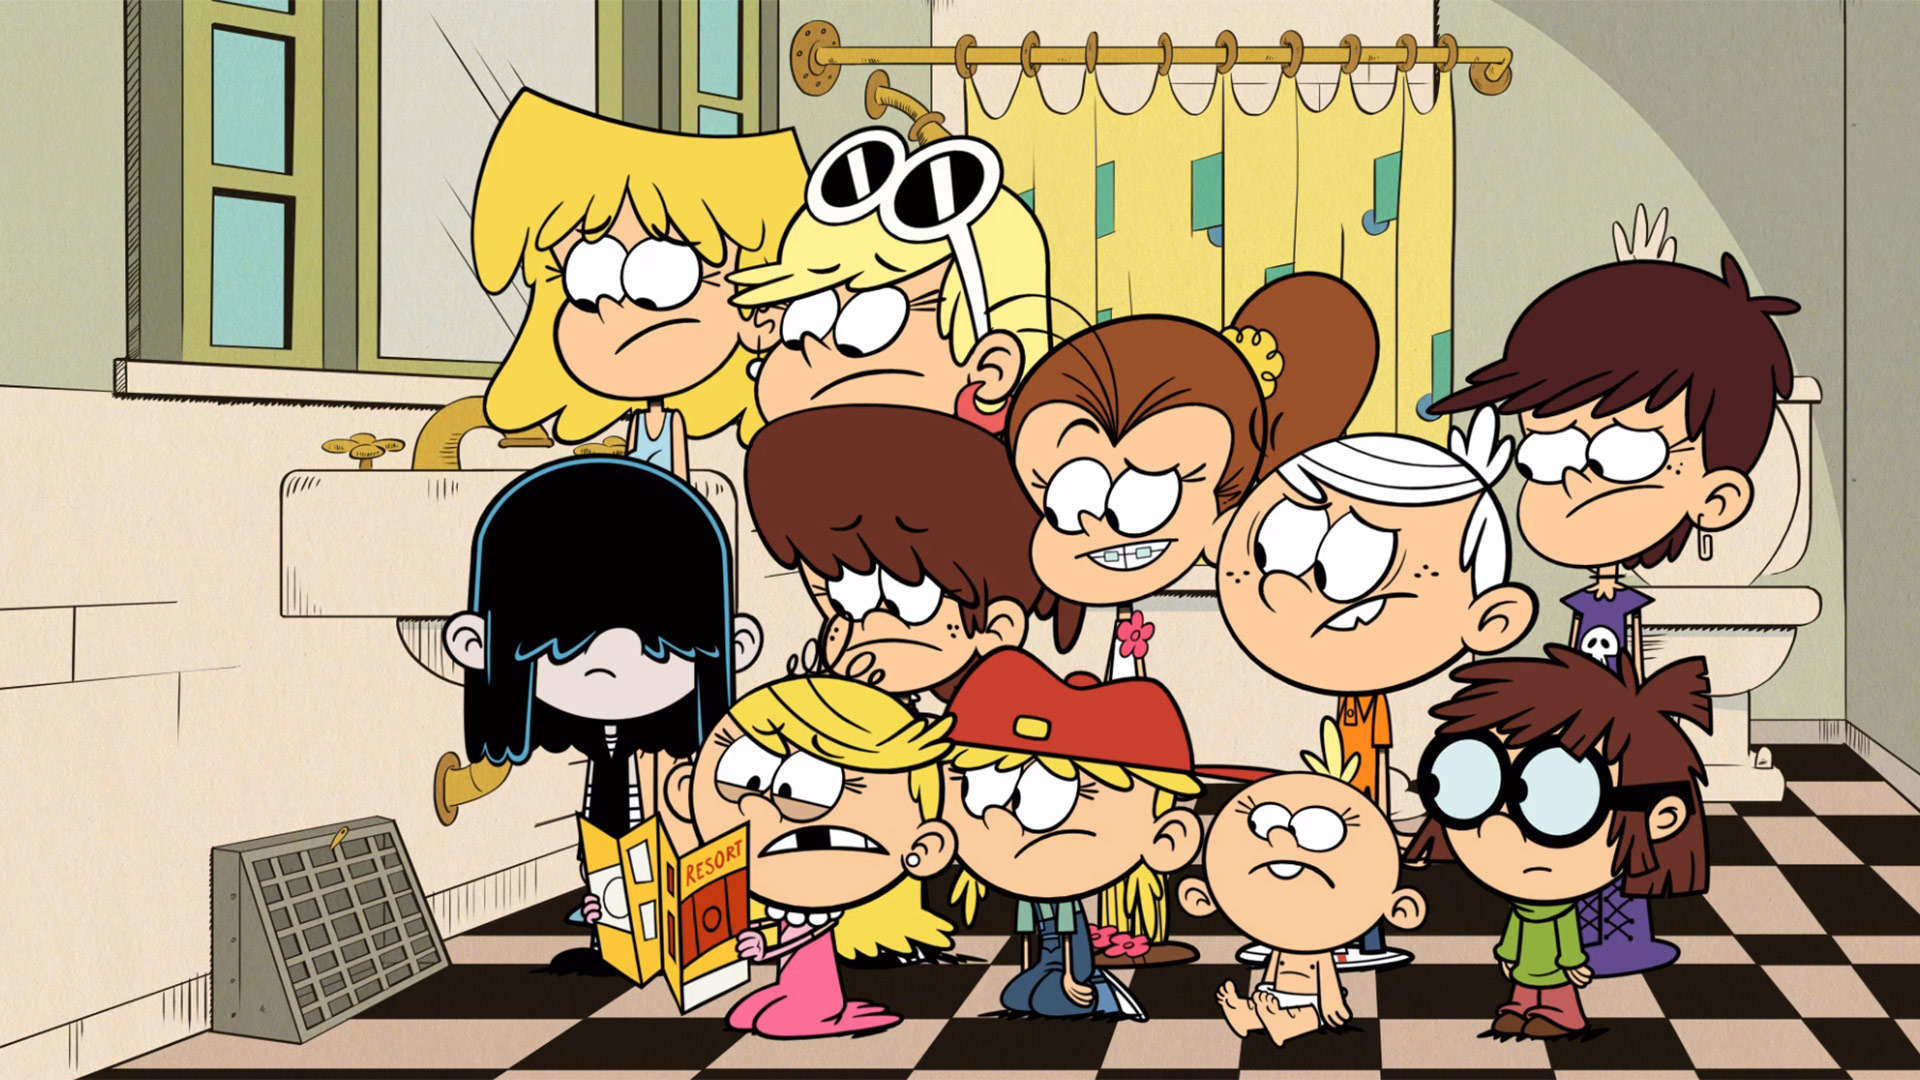 1920x1080 The Loud House Full Episodes, Suite and Sour/Back in Black: Seaso...